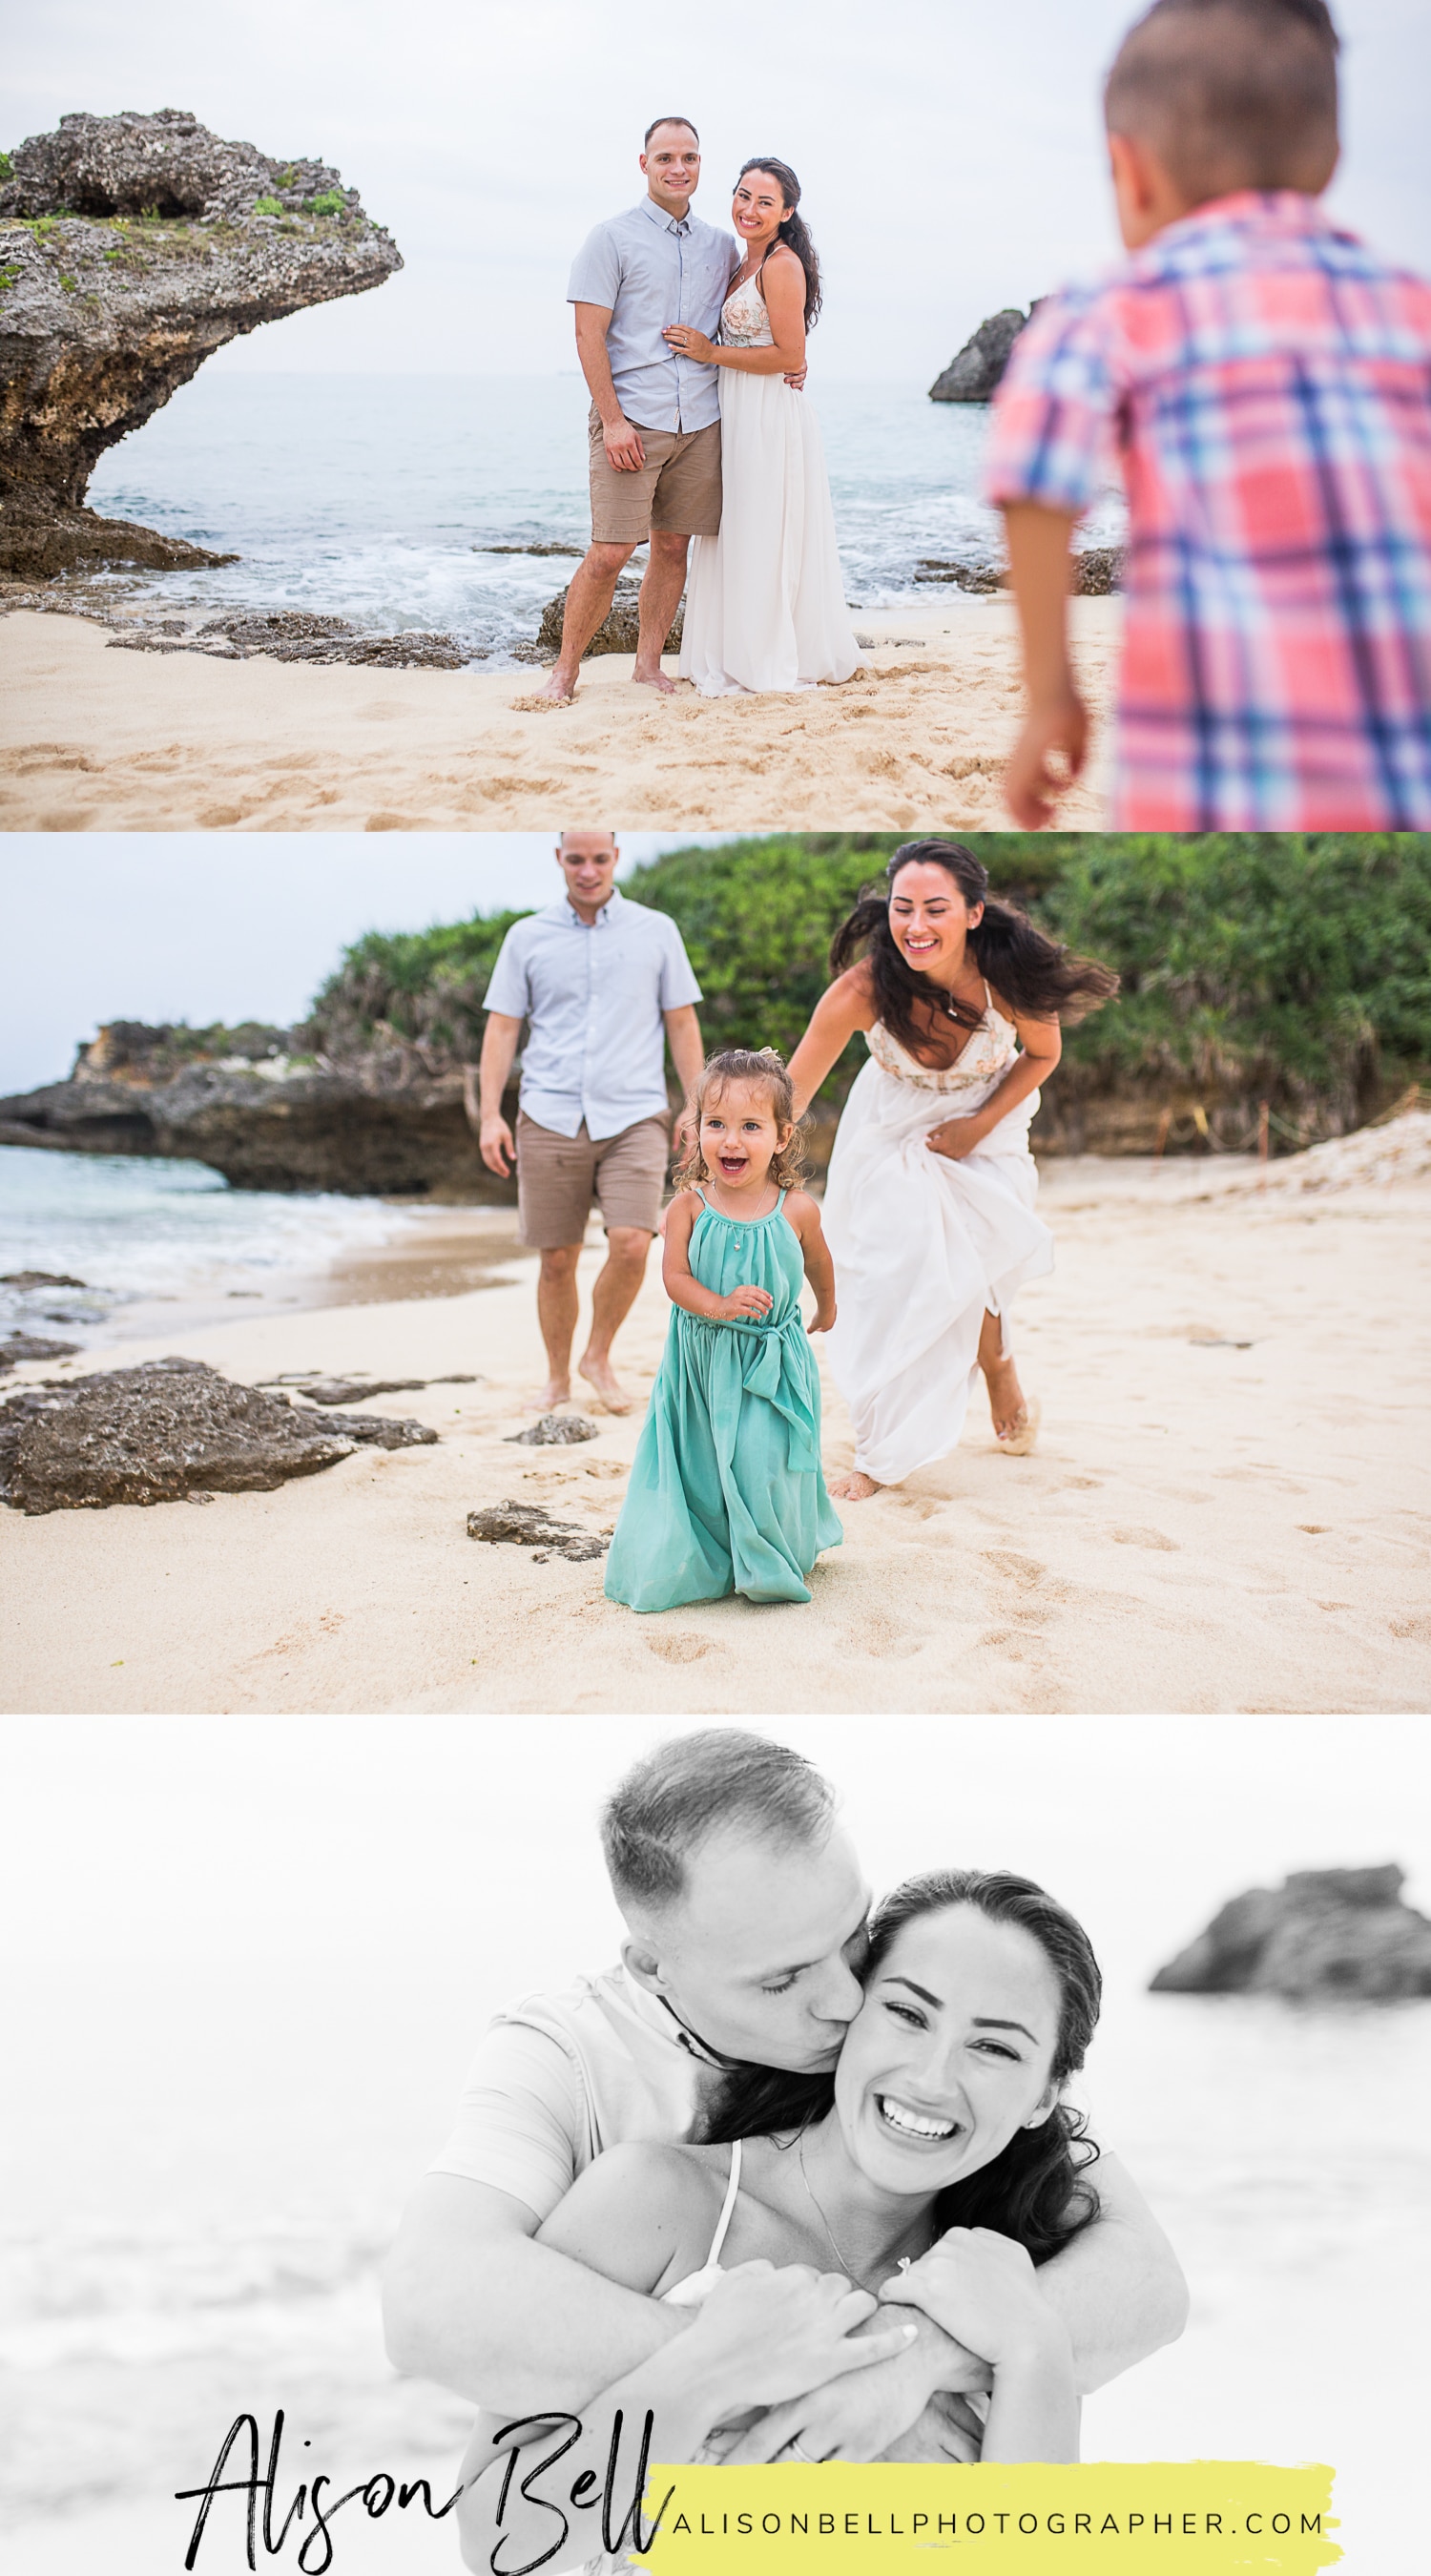 Family of 4, toddler and preschooler, photo session on the beach in Okinawa Japan by Alison Bell Photographer. 